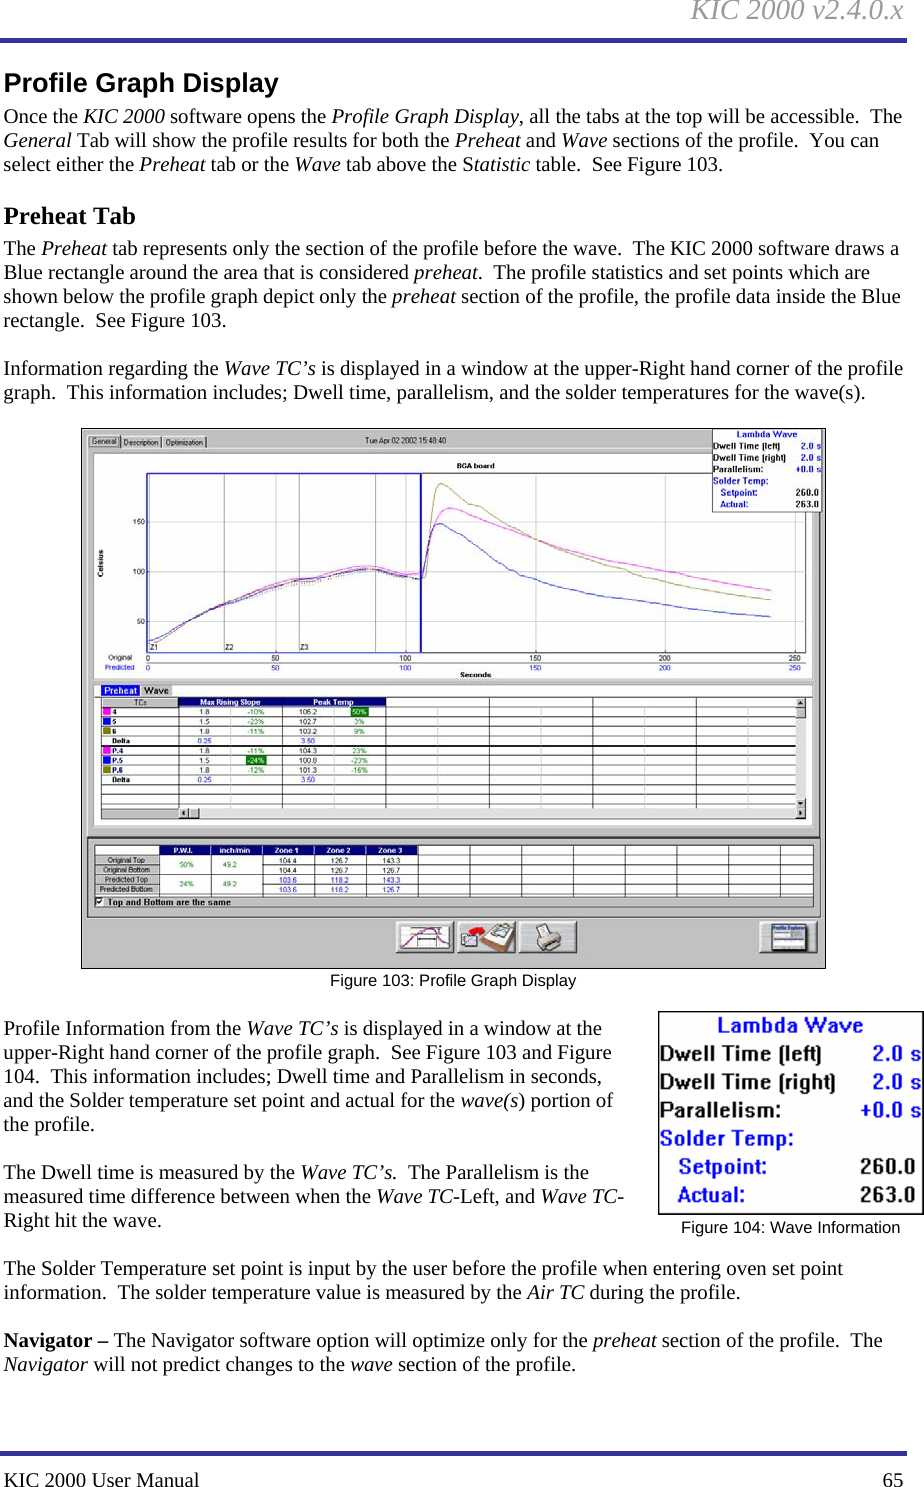 KIC 2000 v2.4.0.x KIC 2000 User Manual    65 Profile Graph Display Once the KIC 2000 software opens the Profile Graph Display, all the tabs at the top will be accessible.  The General Tab will show the profile results for both the Preheat and Wave sections of the profile.  You can select either the Preheat tab or the Wave tab above the Statistic table.  See Figure 103.   Preheat Tab The Preheat tab represents only the section of the profile before the wave.  The KIC 2000 software draws a Blue rectangle around the area that is considered preheat.  The profile statistics and set points which are shown below the profile graph depict only the preheat section of the profile, the profile data inside the Blue rectangle.  See Figure 103.  Information regarding the Wave TC’s is displayed in a window at the upper-Right hand corner of the profile graph.  This information includes; Dwell time, parallelism, and the solder temperatures for the wave(s).   Figure 103: Profile Graph Display  Profile Information from the Wave TC’s is displayed in a window at the upper-Right hand corner of the profile graph.  See Figure 103 and Figure 104.  This information includes; Dwell time and Parallelism in seconds, and the Solder temperature set point and actual for the wave(s) portion of the profile.  The Dwell time is measured by the Wave TC’s.  The Parallelism is the measured time difference between when the Wave TC-Left, and Wave TC-Right hit the wave.  The Solder Temperature set point is input by the user before the profile when entering oven set point information.  The solder temperature value is measured by the Air TC during the profile.  Navigator – The Navigator software option will optimize only for the preheat section of the profile.  The Navigator will not predict changes to the wave section of the profile.   Figure 104: Wave Information 